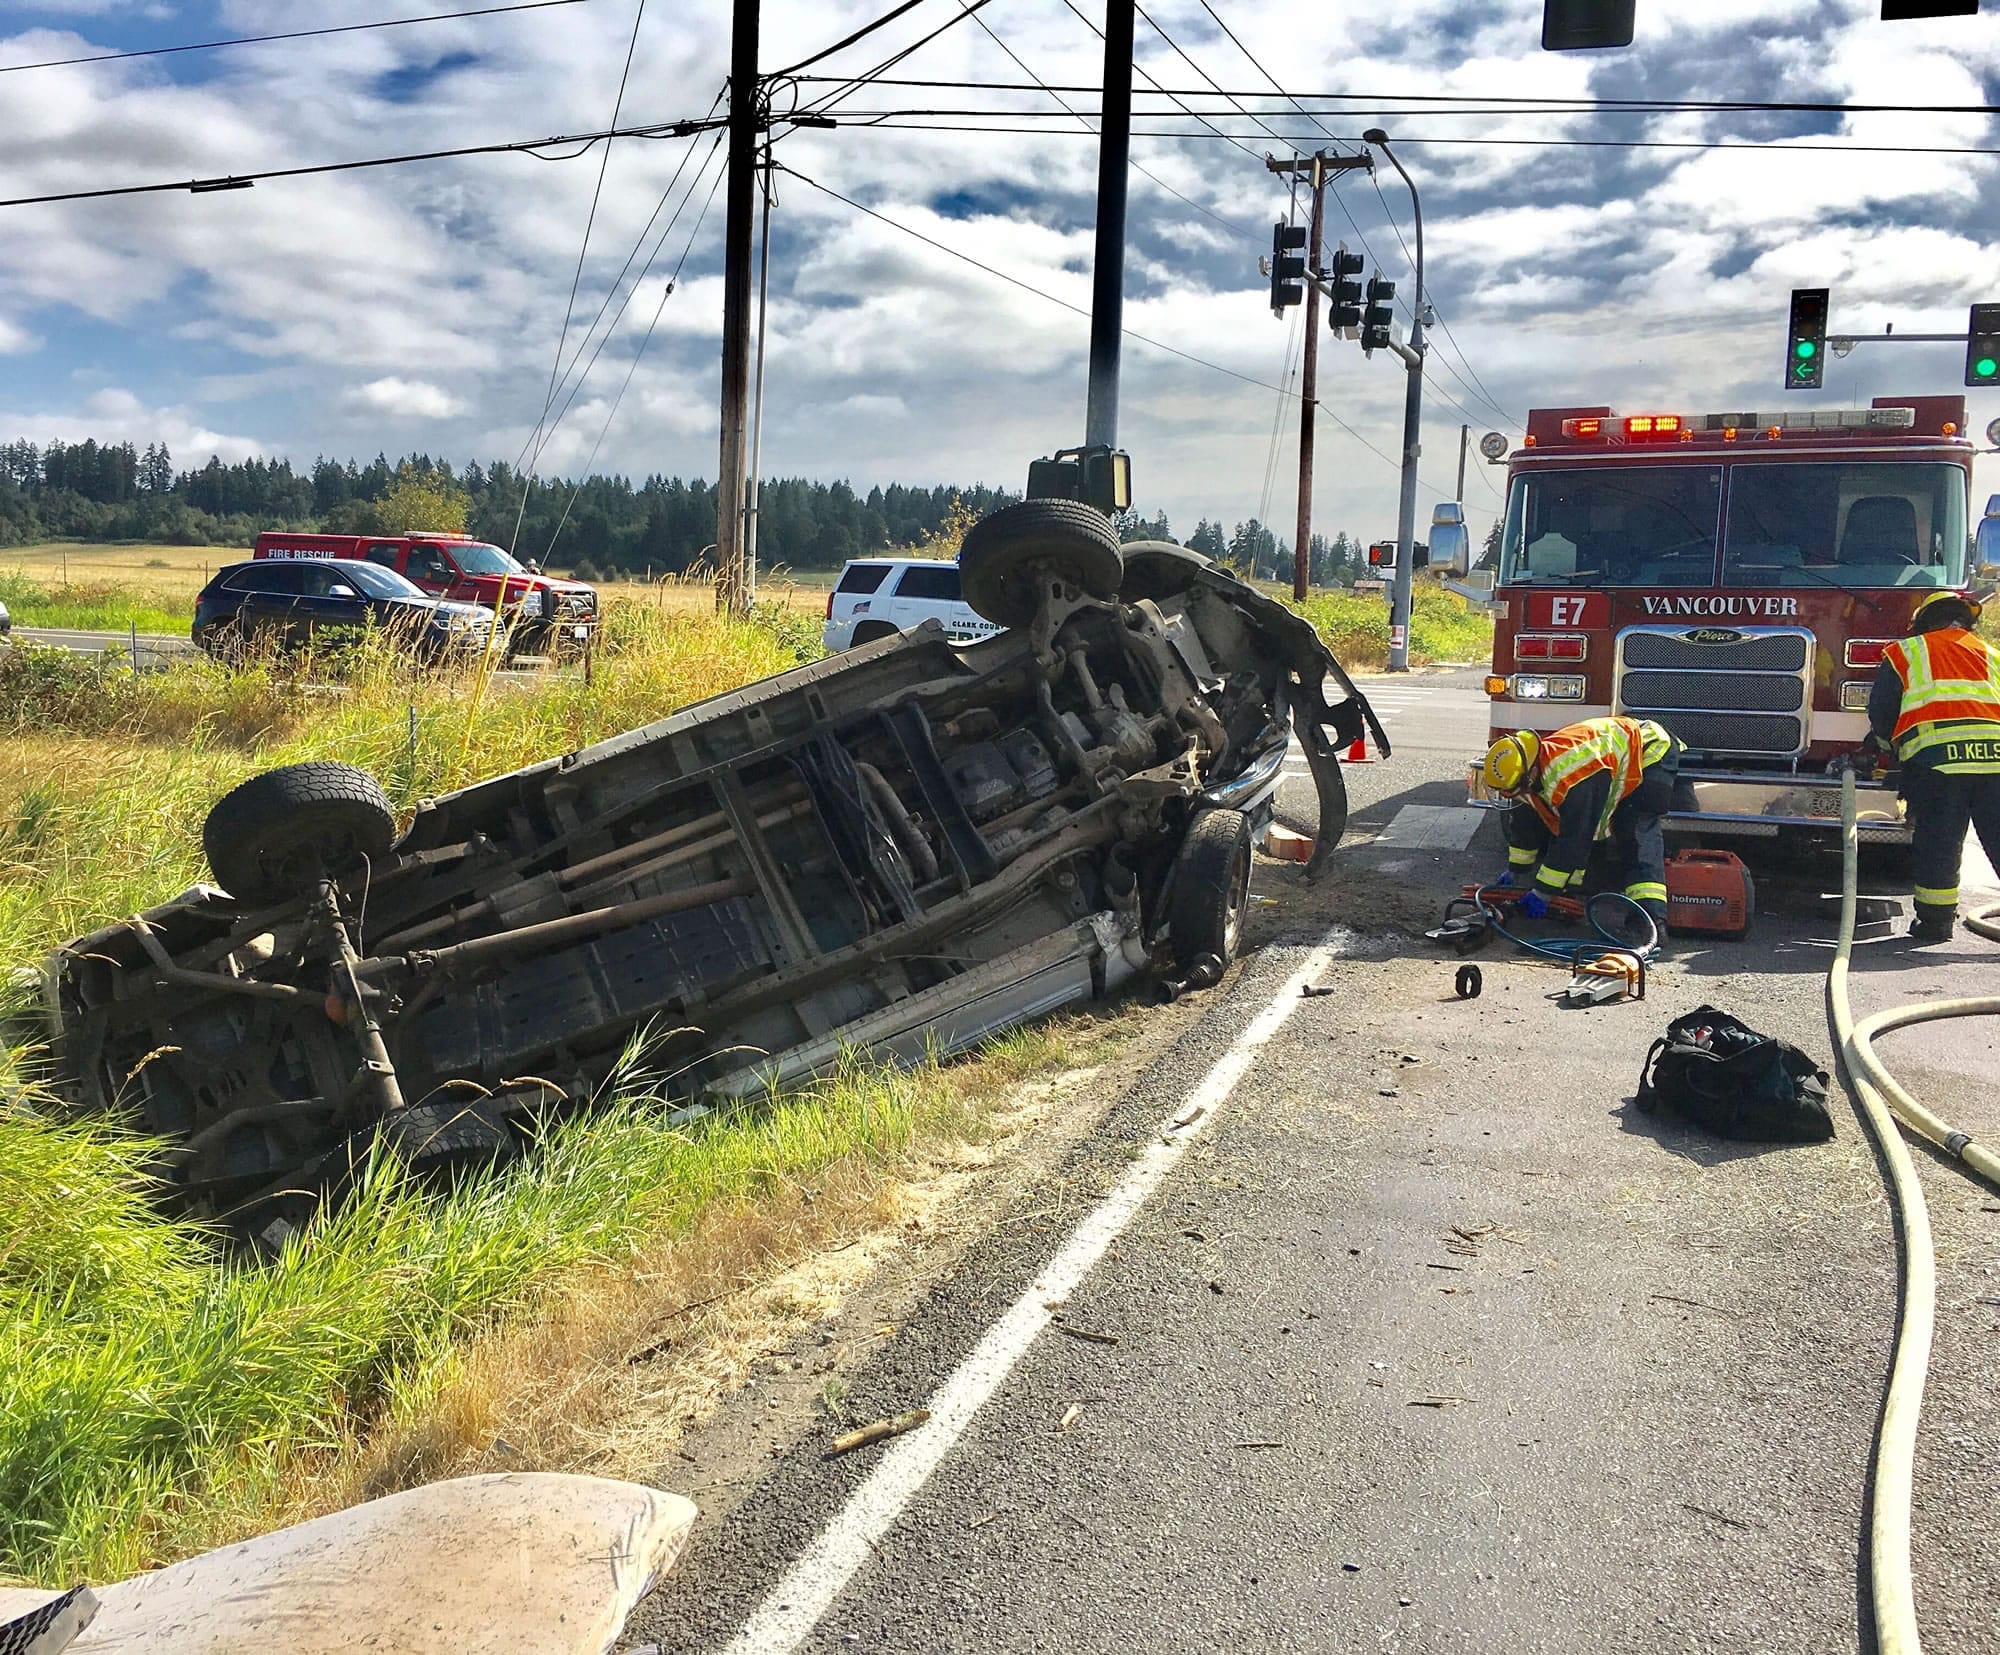 Two people were transported to area hospitals after a two-vehicle crash at Northeast 72nd Avenue and Northeast 199th Street Wednesday morning.